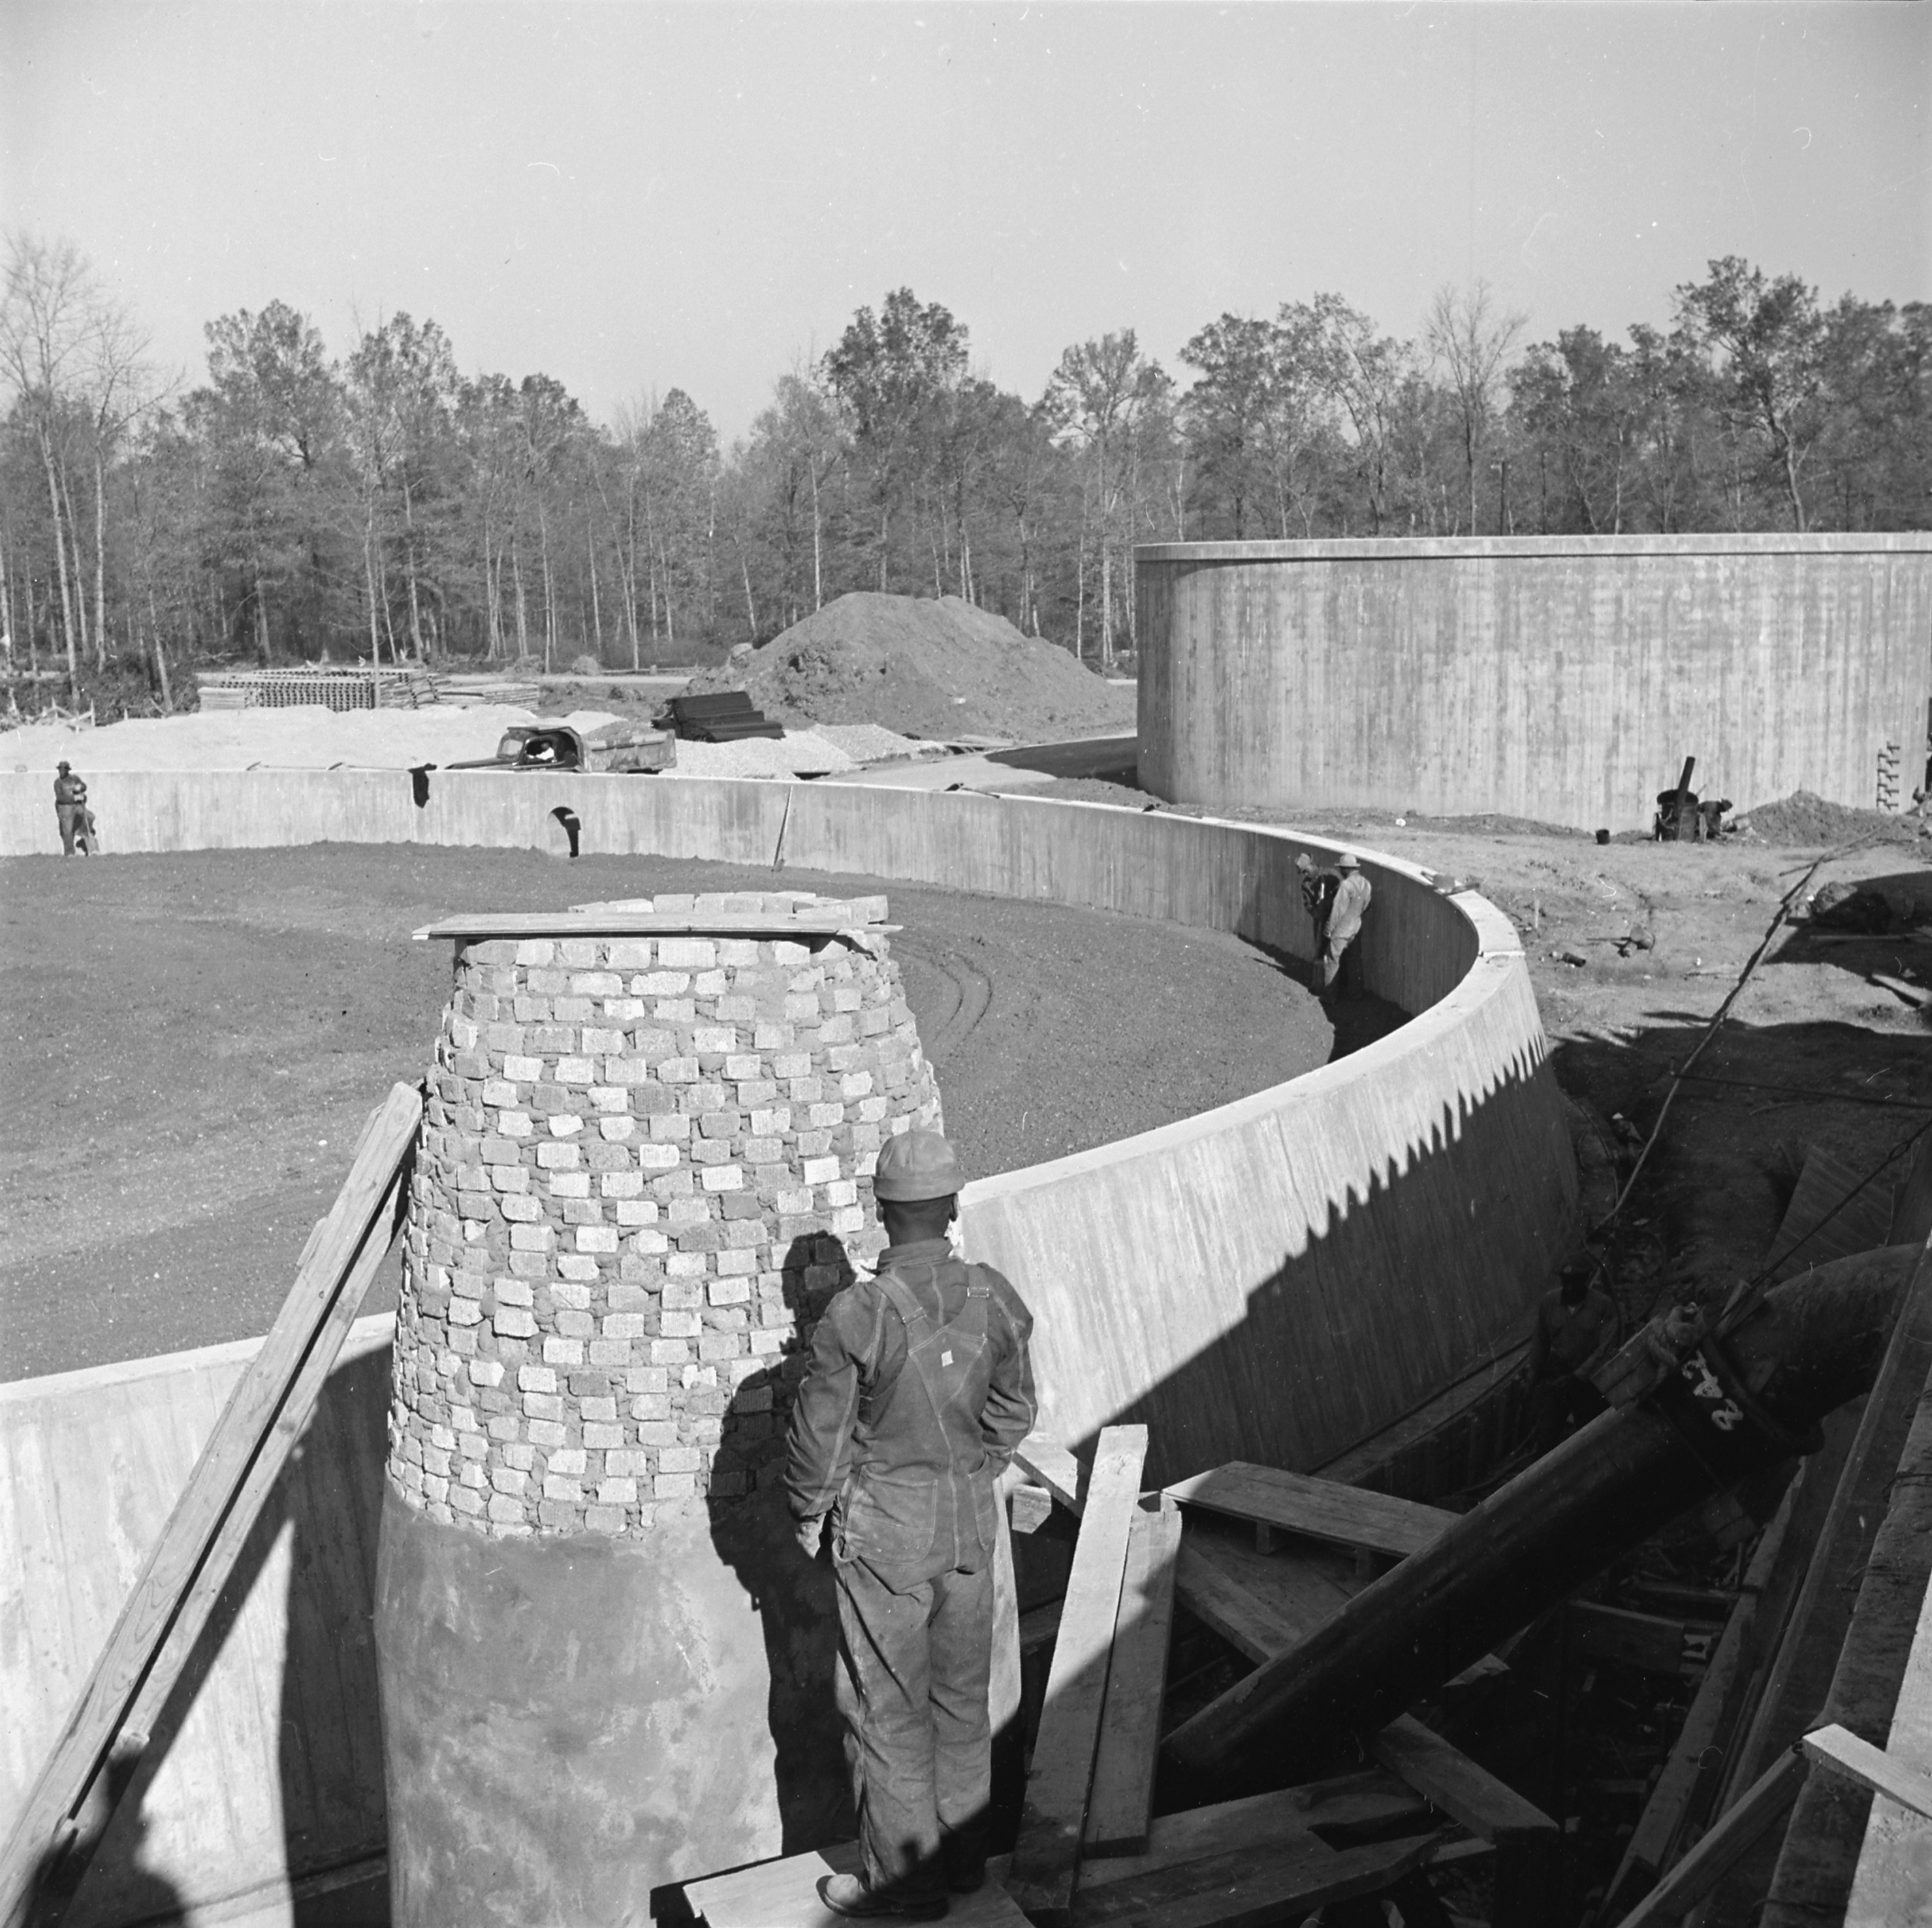 Construction of the sewage disposal plant at Jerome War Relocation Center, Arkansas, United States, 14 Nov 1942, photo 3 of 5